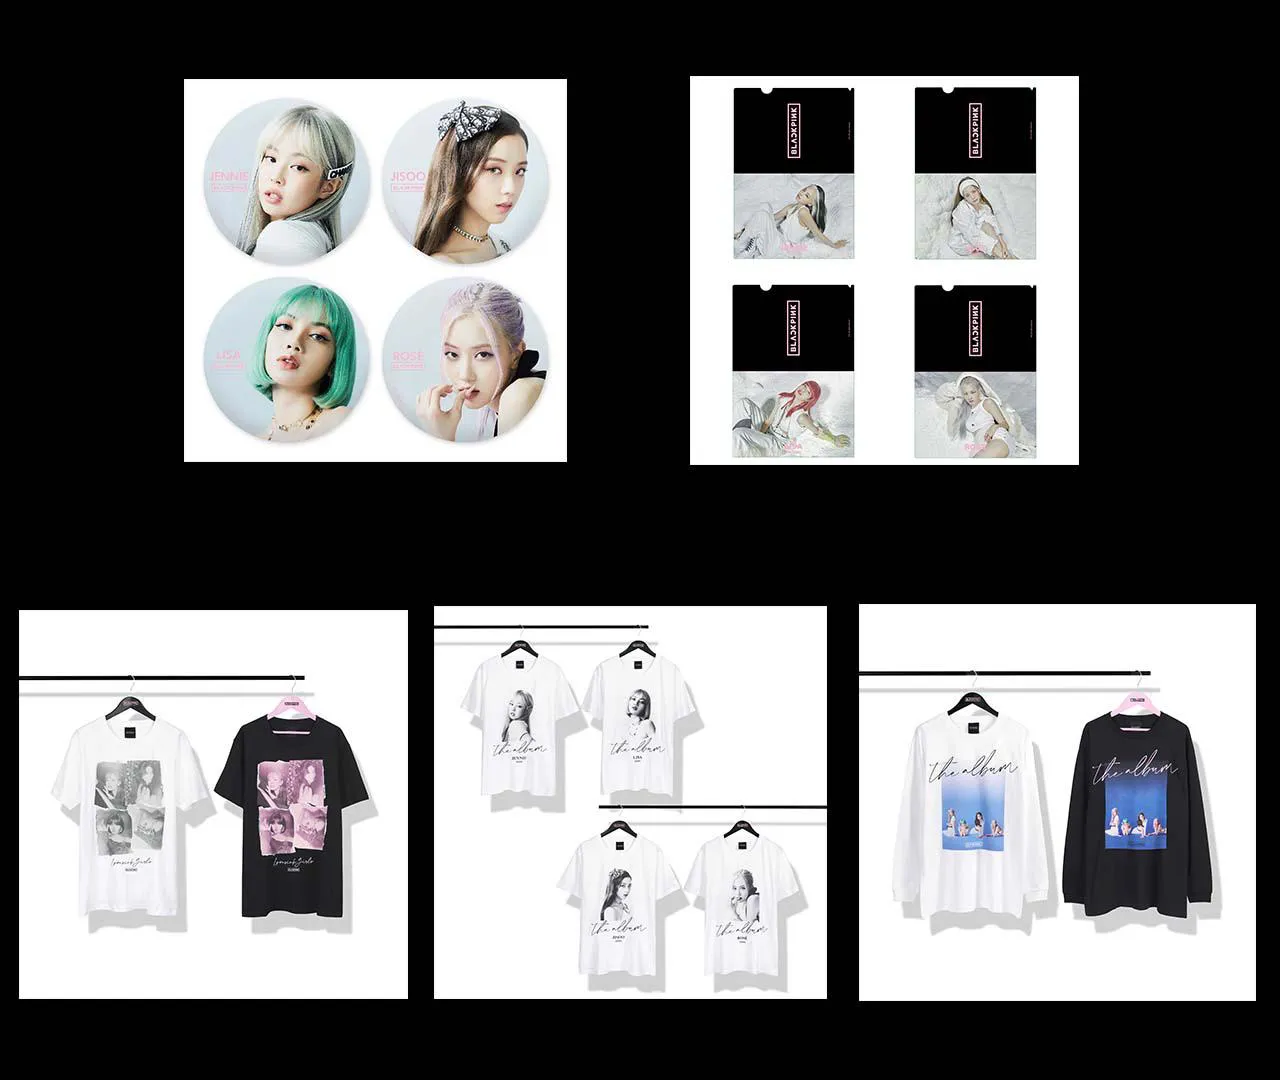 「BLACKPINK POPUP STORE in PARCO」でも購入できるグッズ